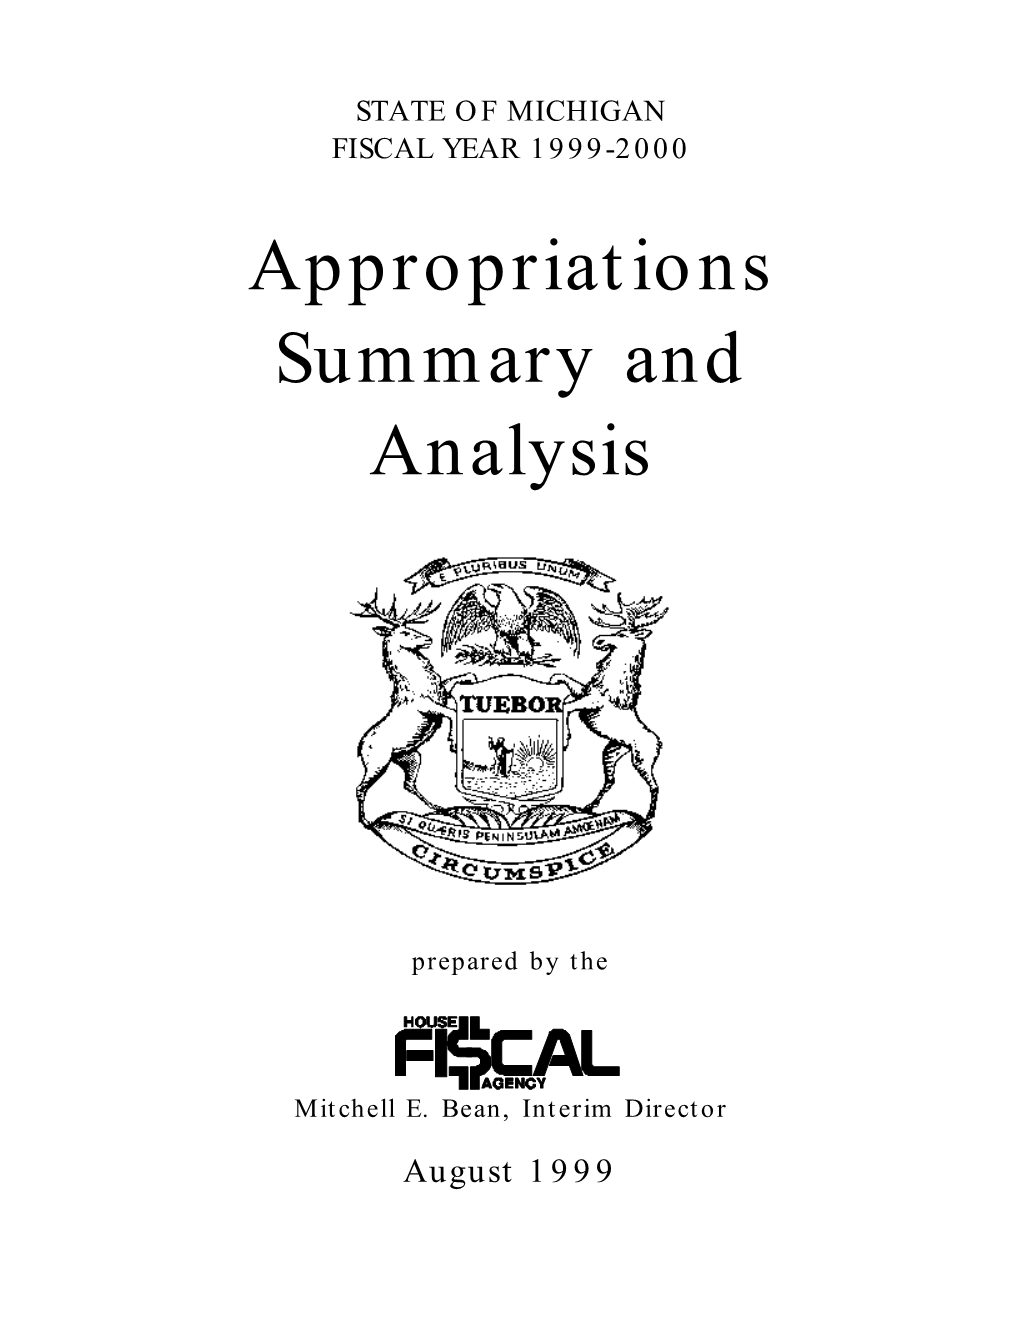 Appropriations Summary and Analysis